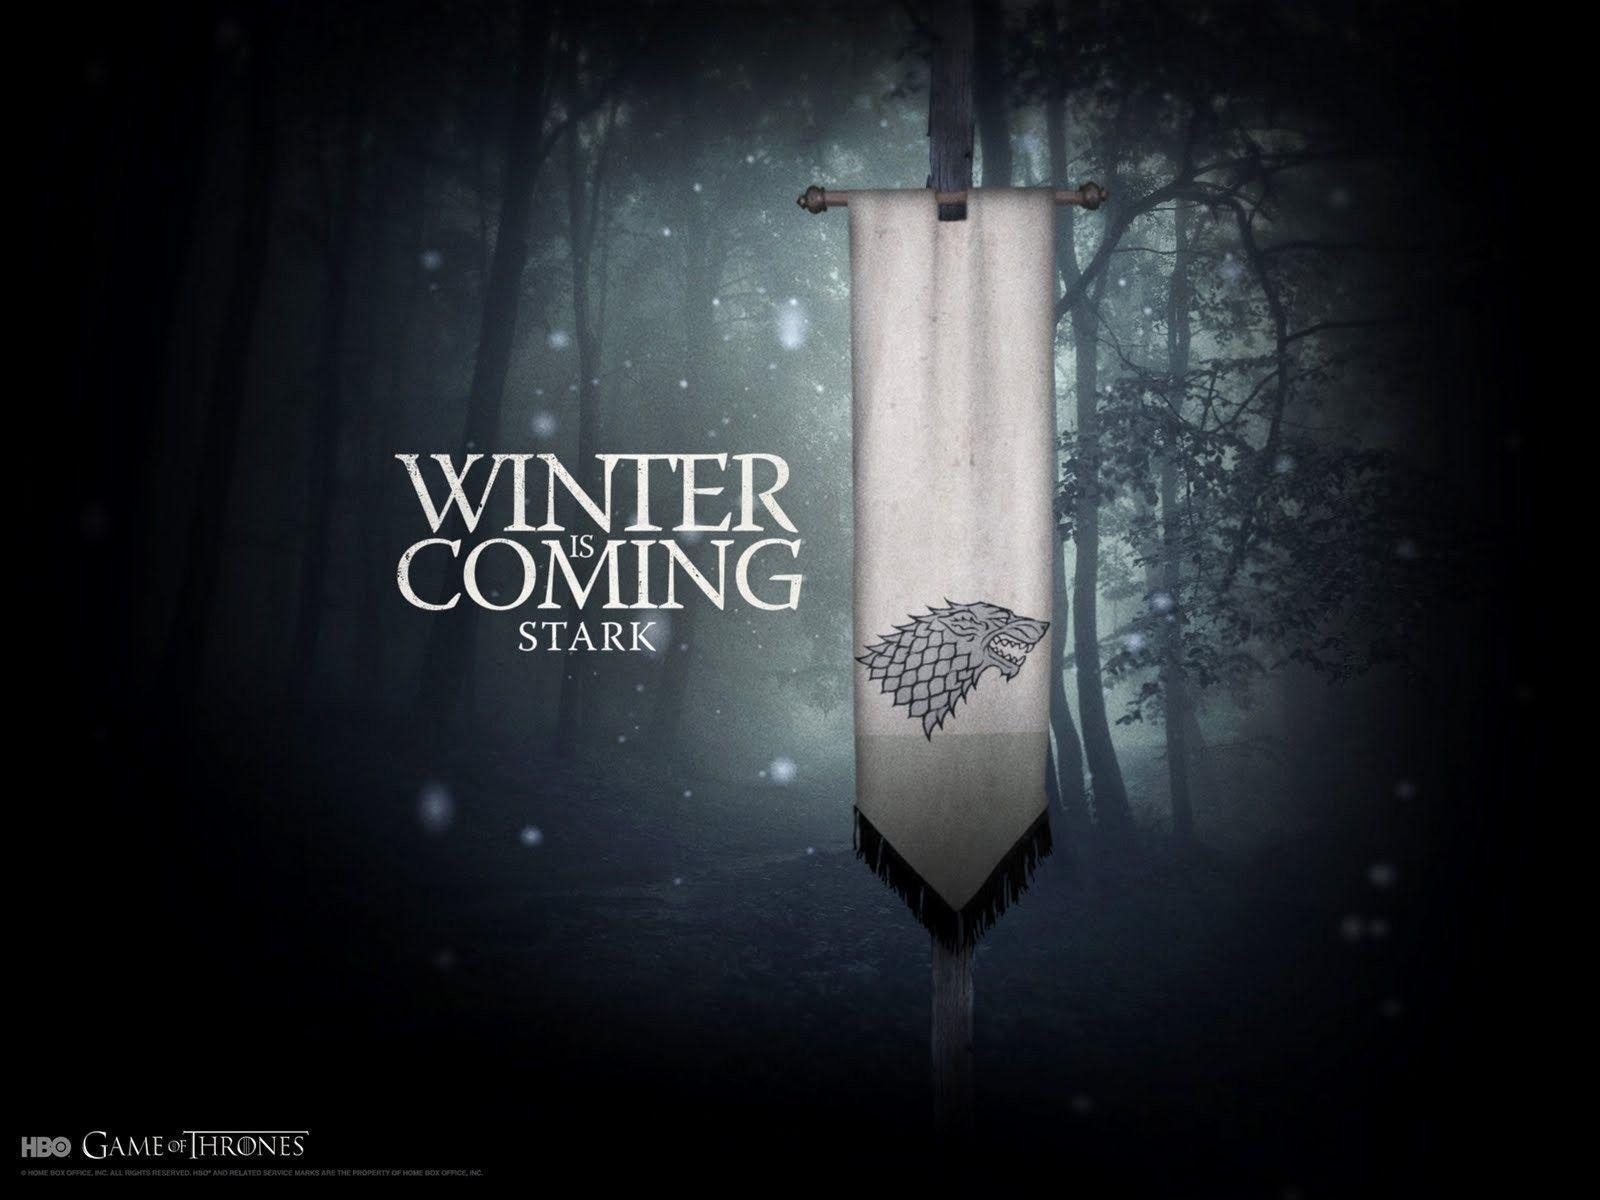 10 Latest Hbo Game Of Thrones Wallpaper FULL HD 1080p For PC Background